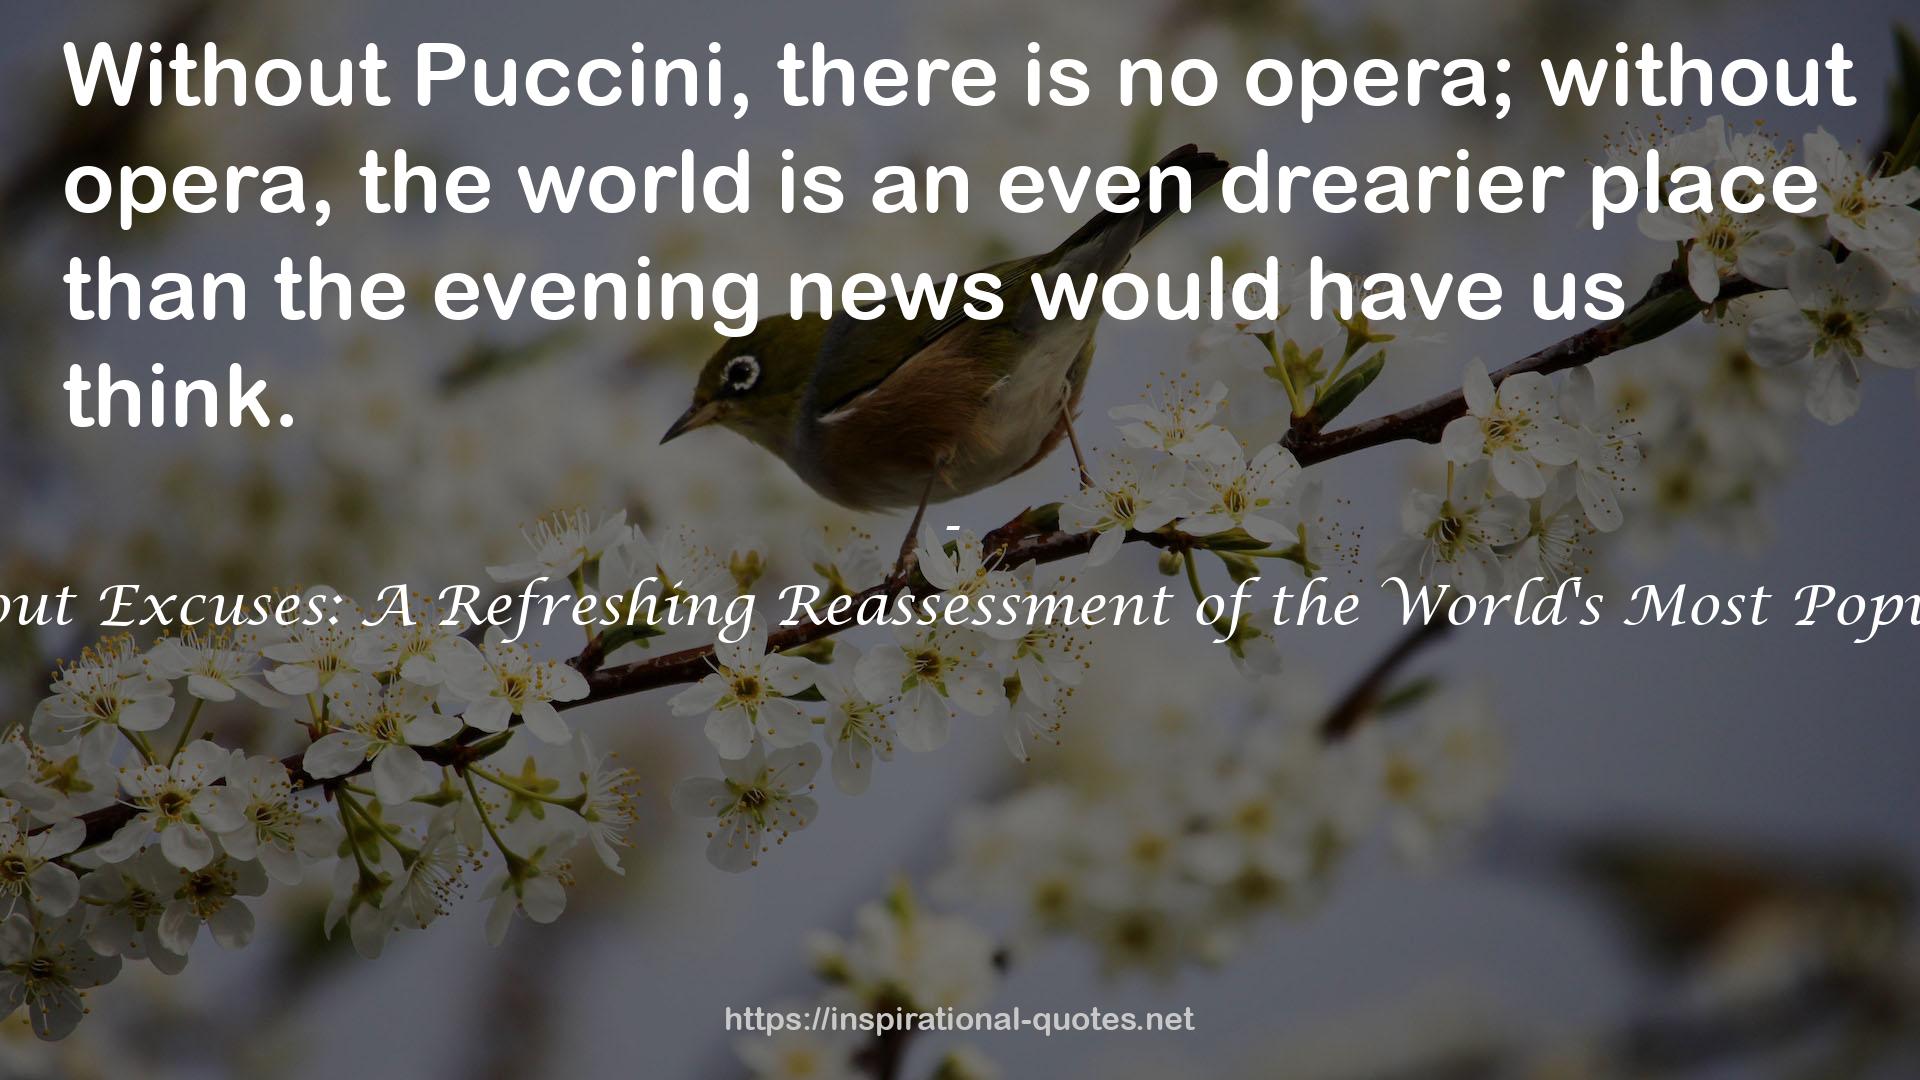 Puccini Without Excuses: A Refreshing Reassessment of the World's Most Popular Composer QUOTES